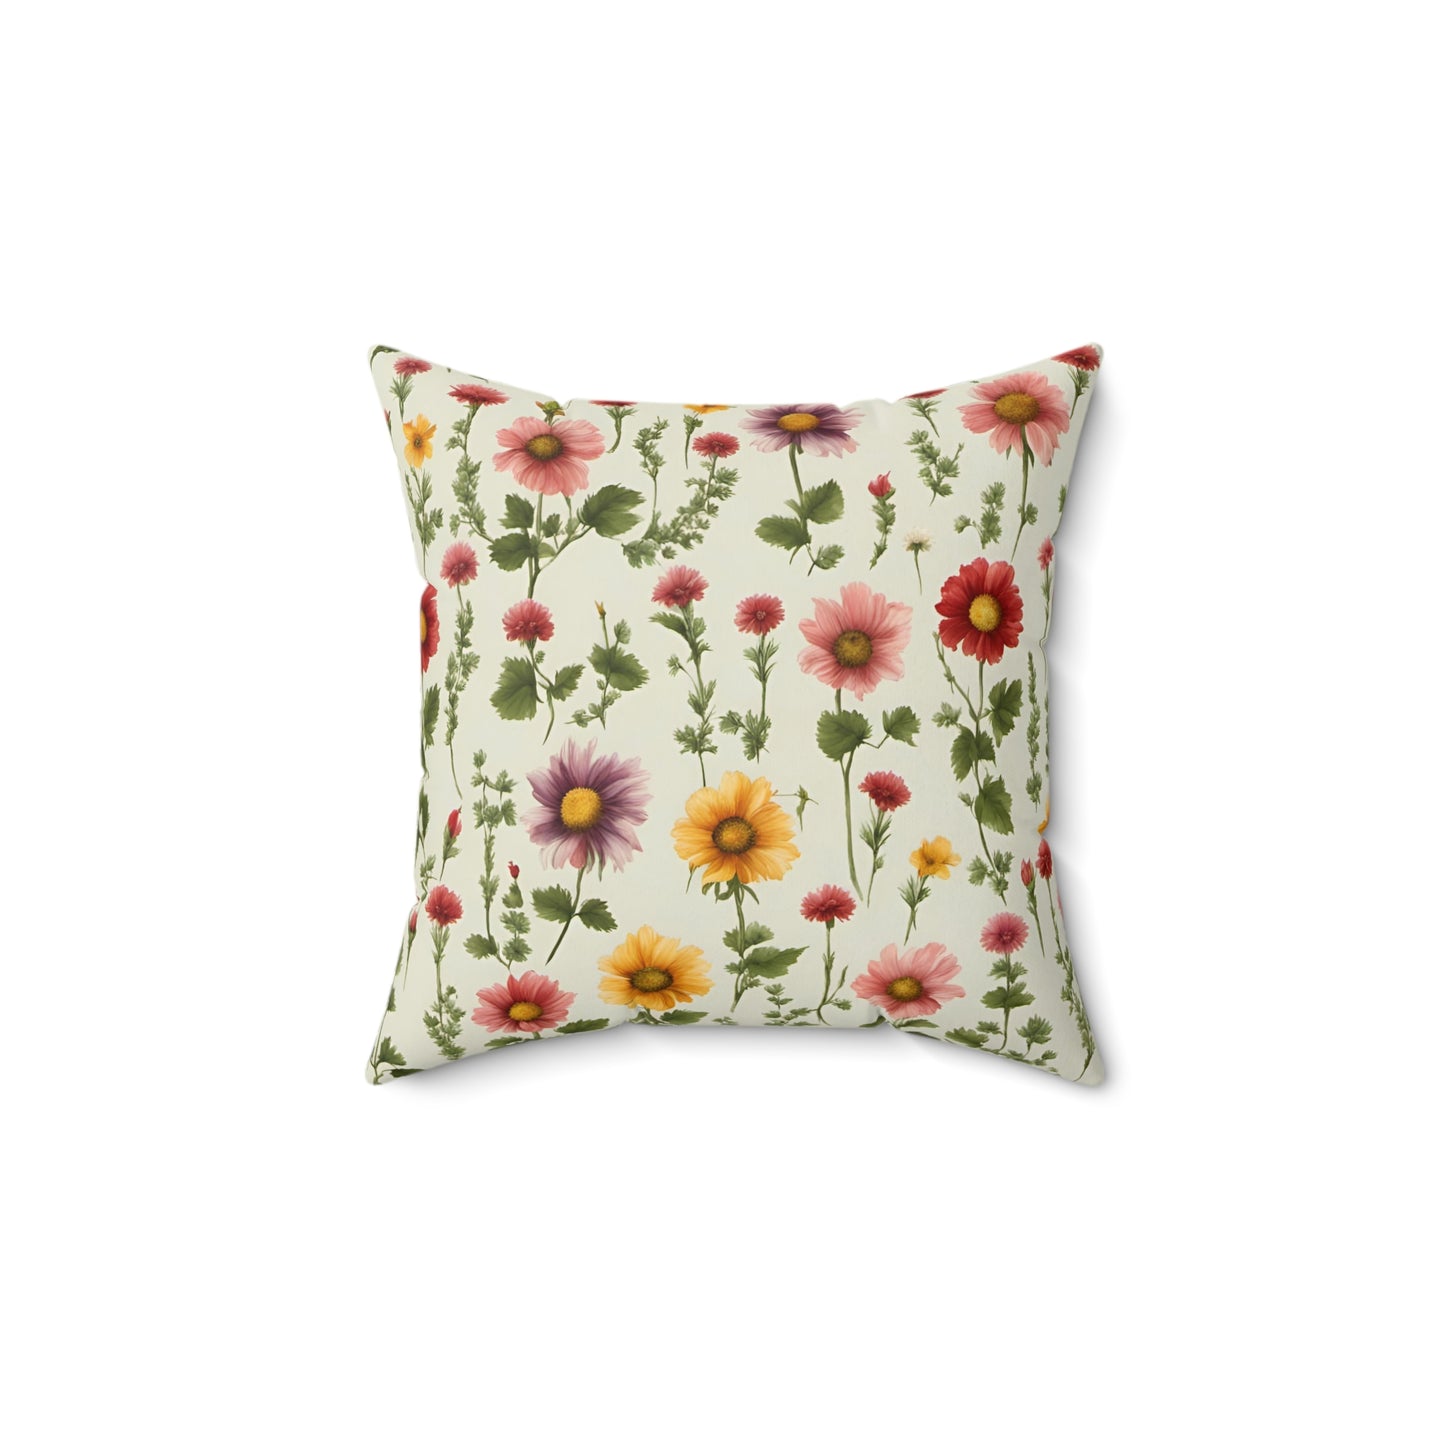 Floralie Spun Polyester Square Pillow Limited Edition 🌺✨